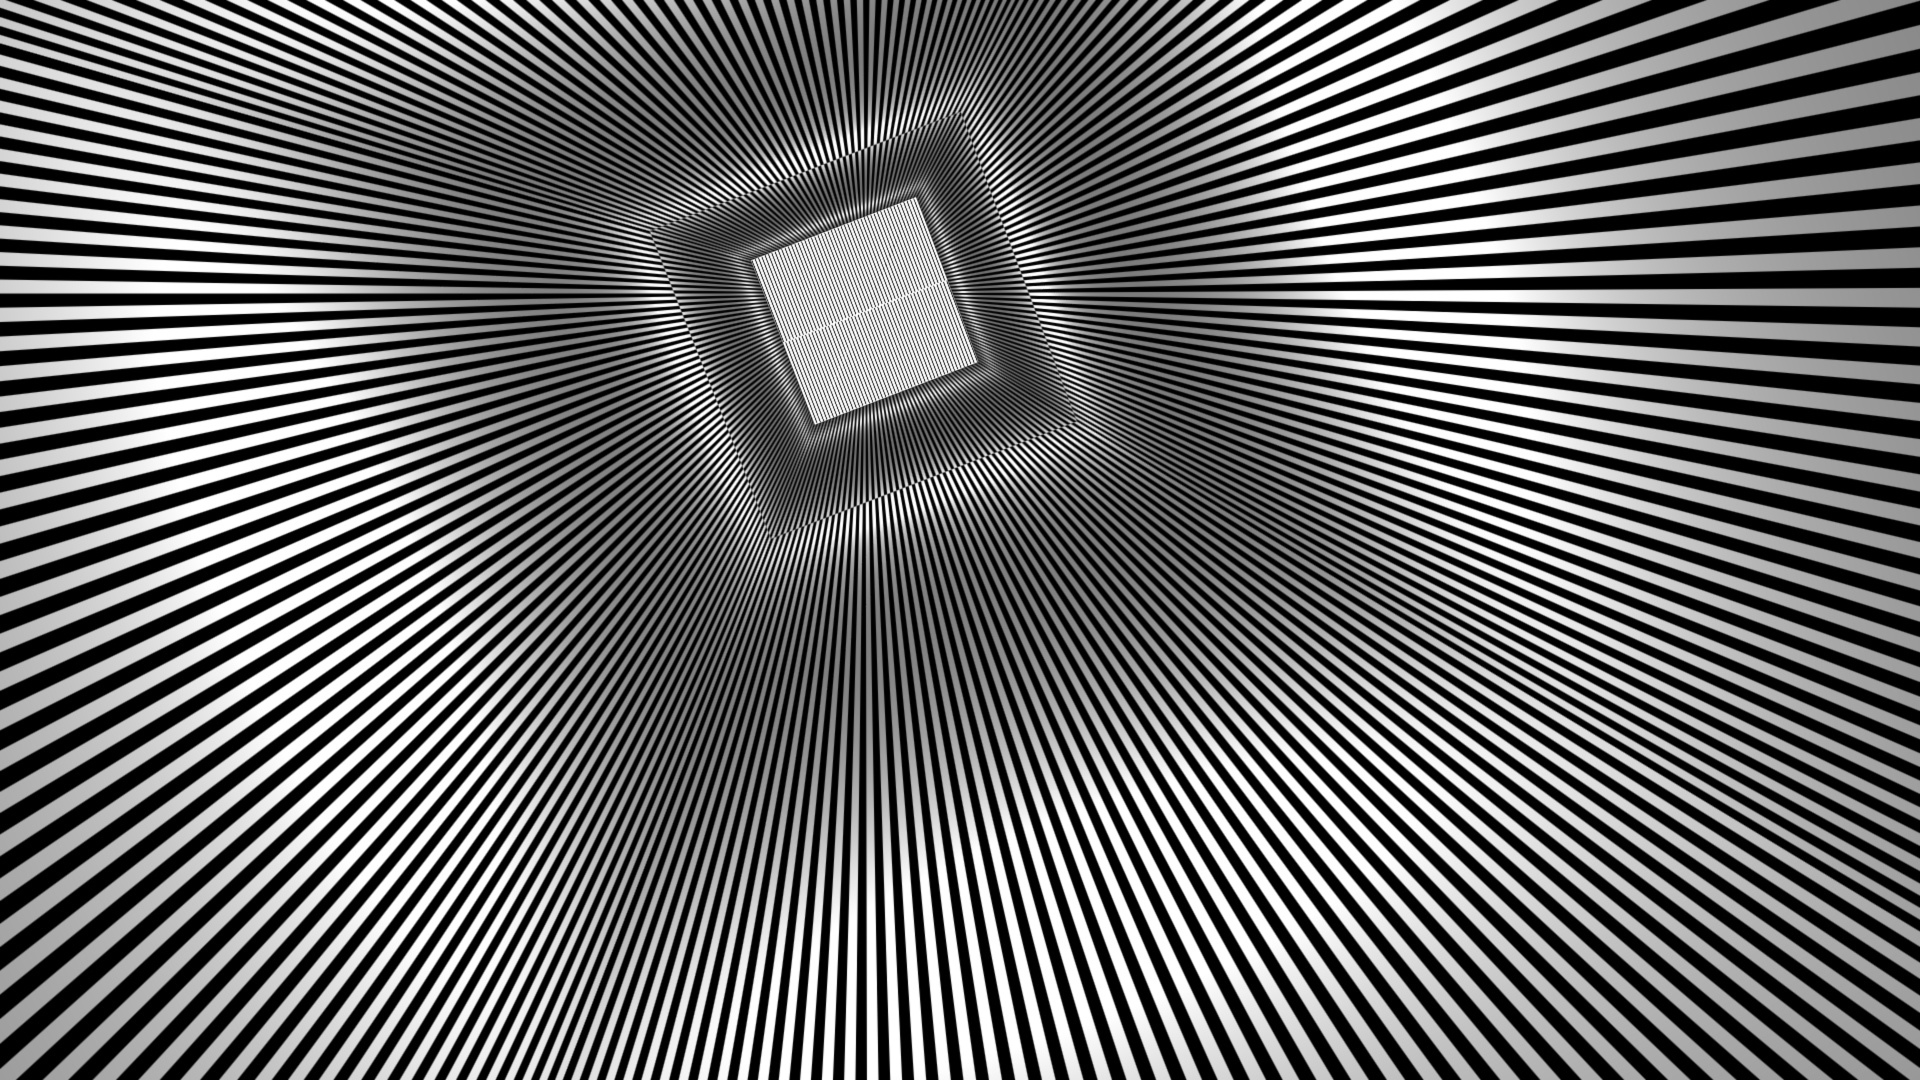 Square Rays Optical Illusion Teaser Psychedelic Wallpaper